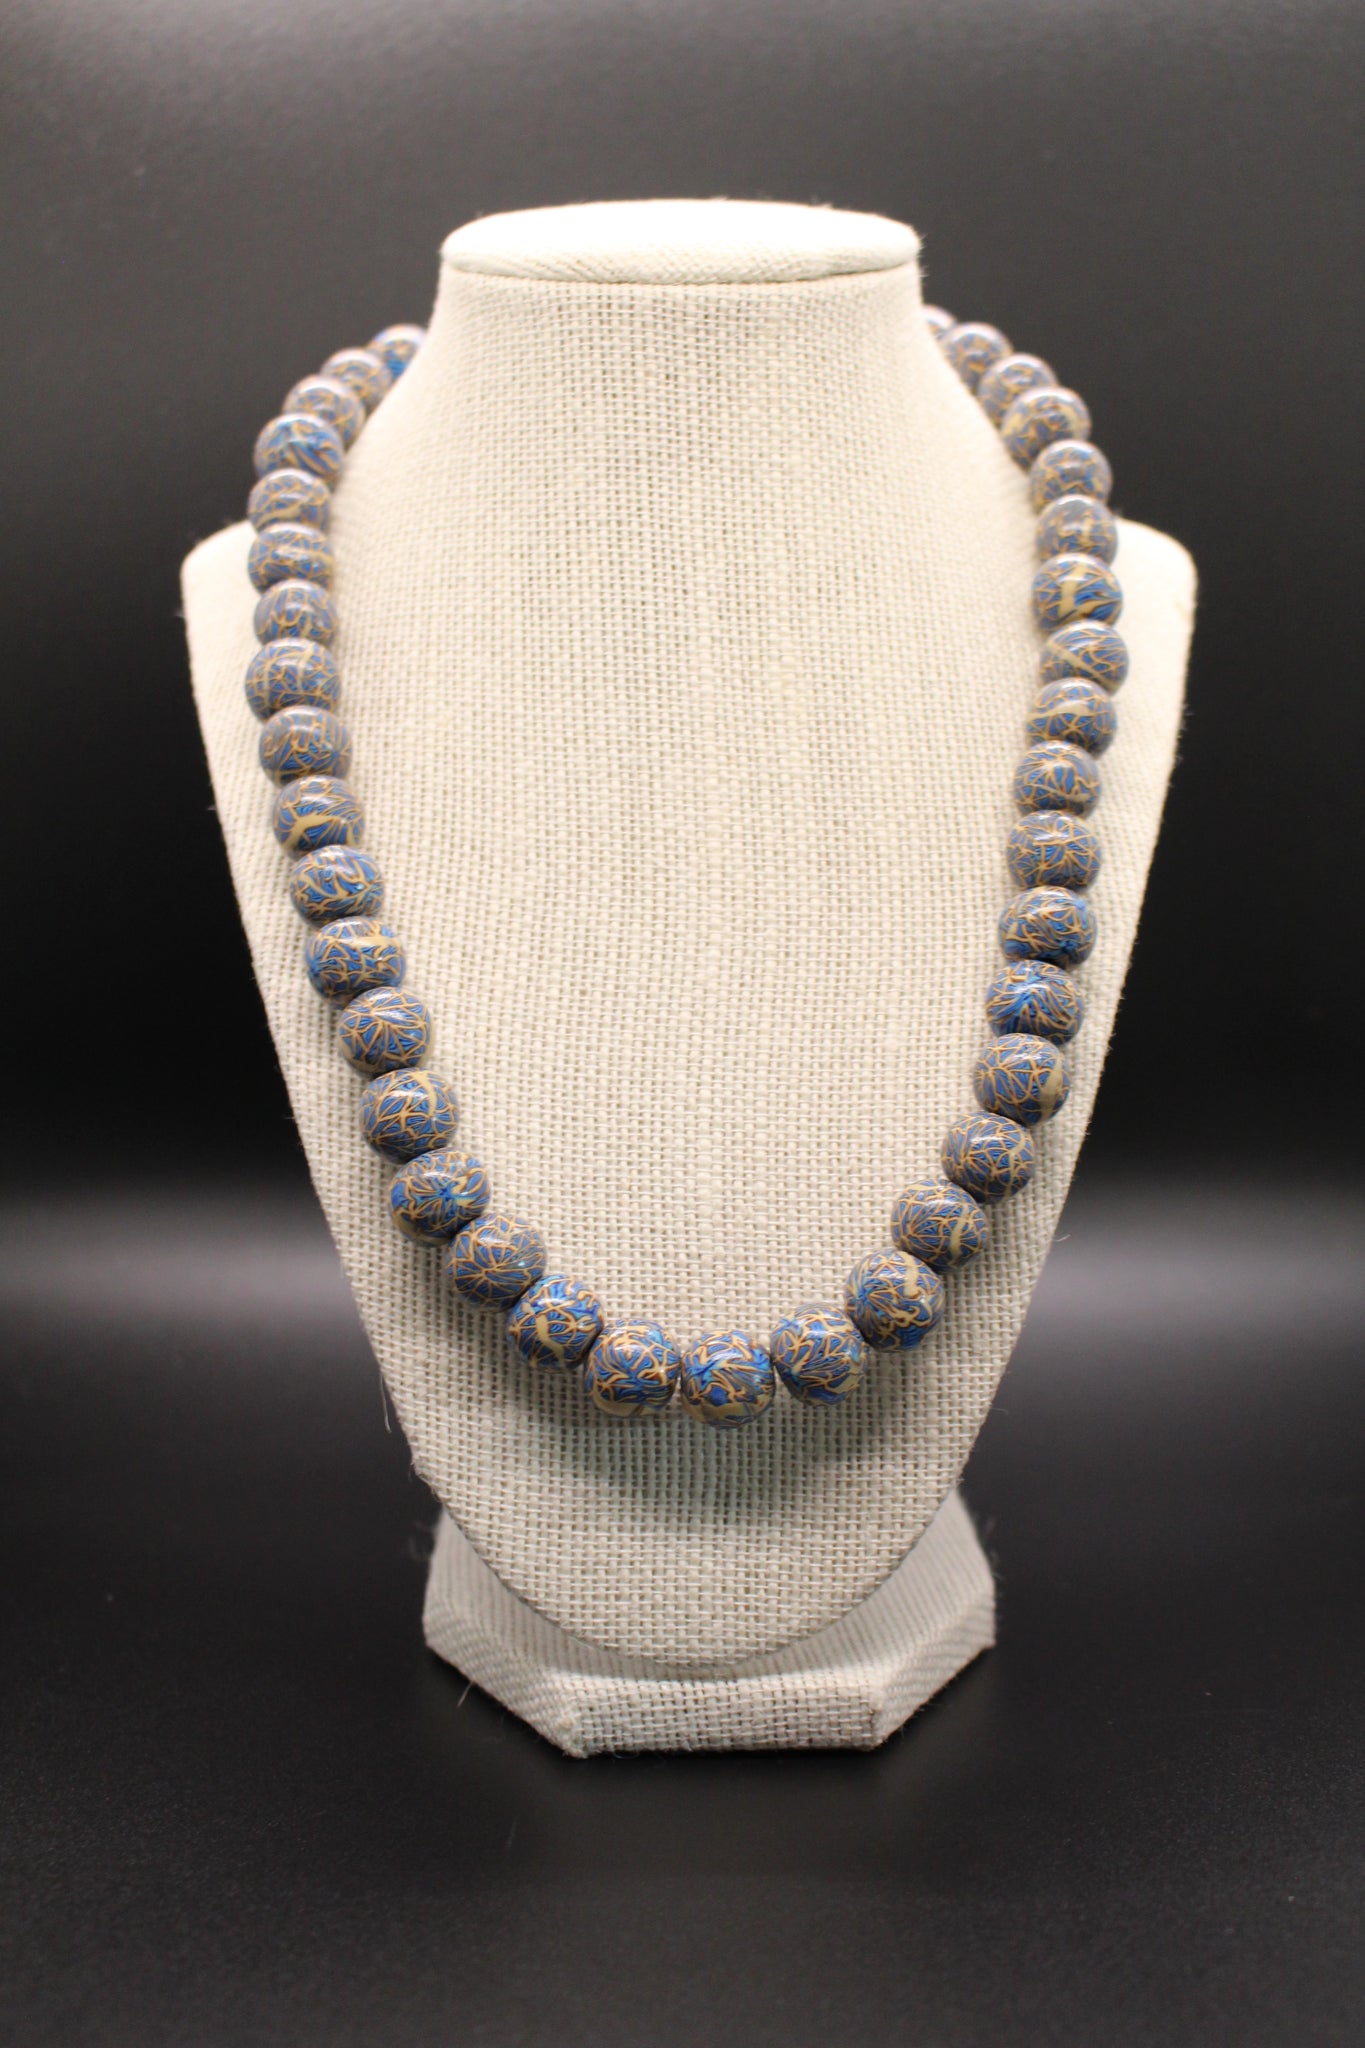 KD-SS001 The "Lotus" Pale Blue Hand-Rolled, 20 Inch Gender Neutral Necklace